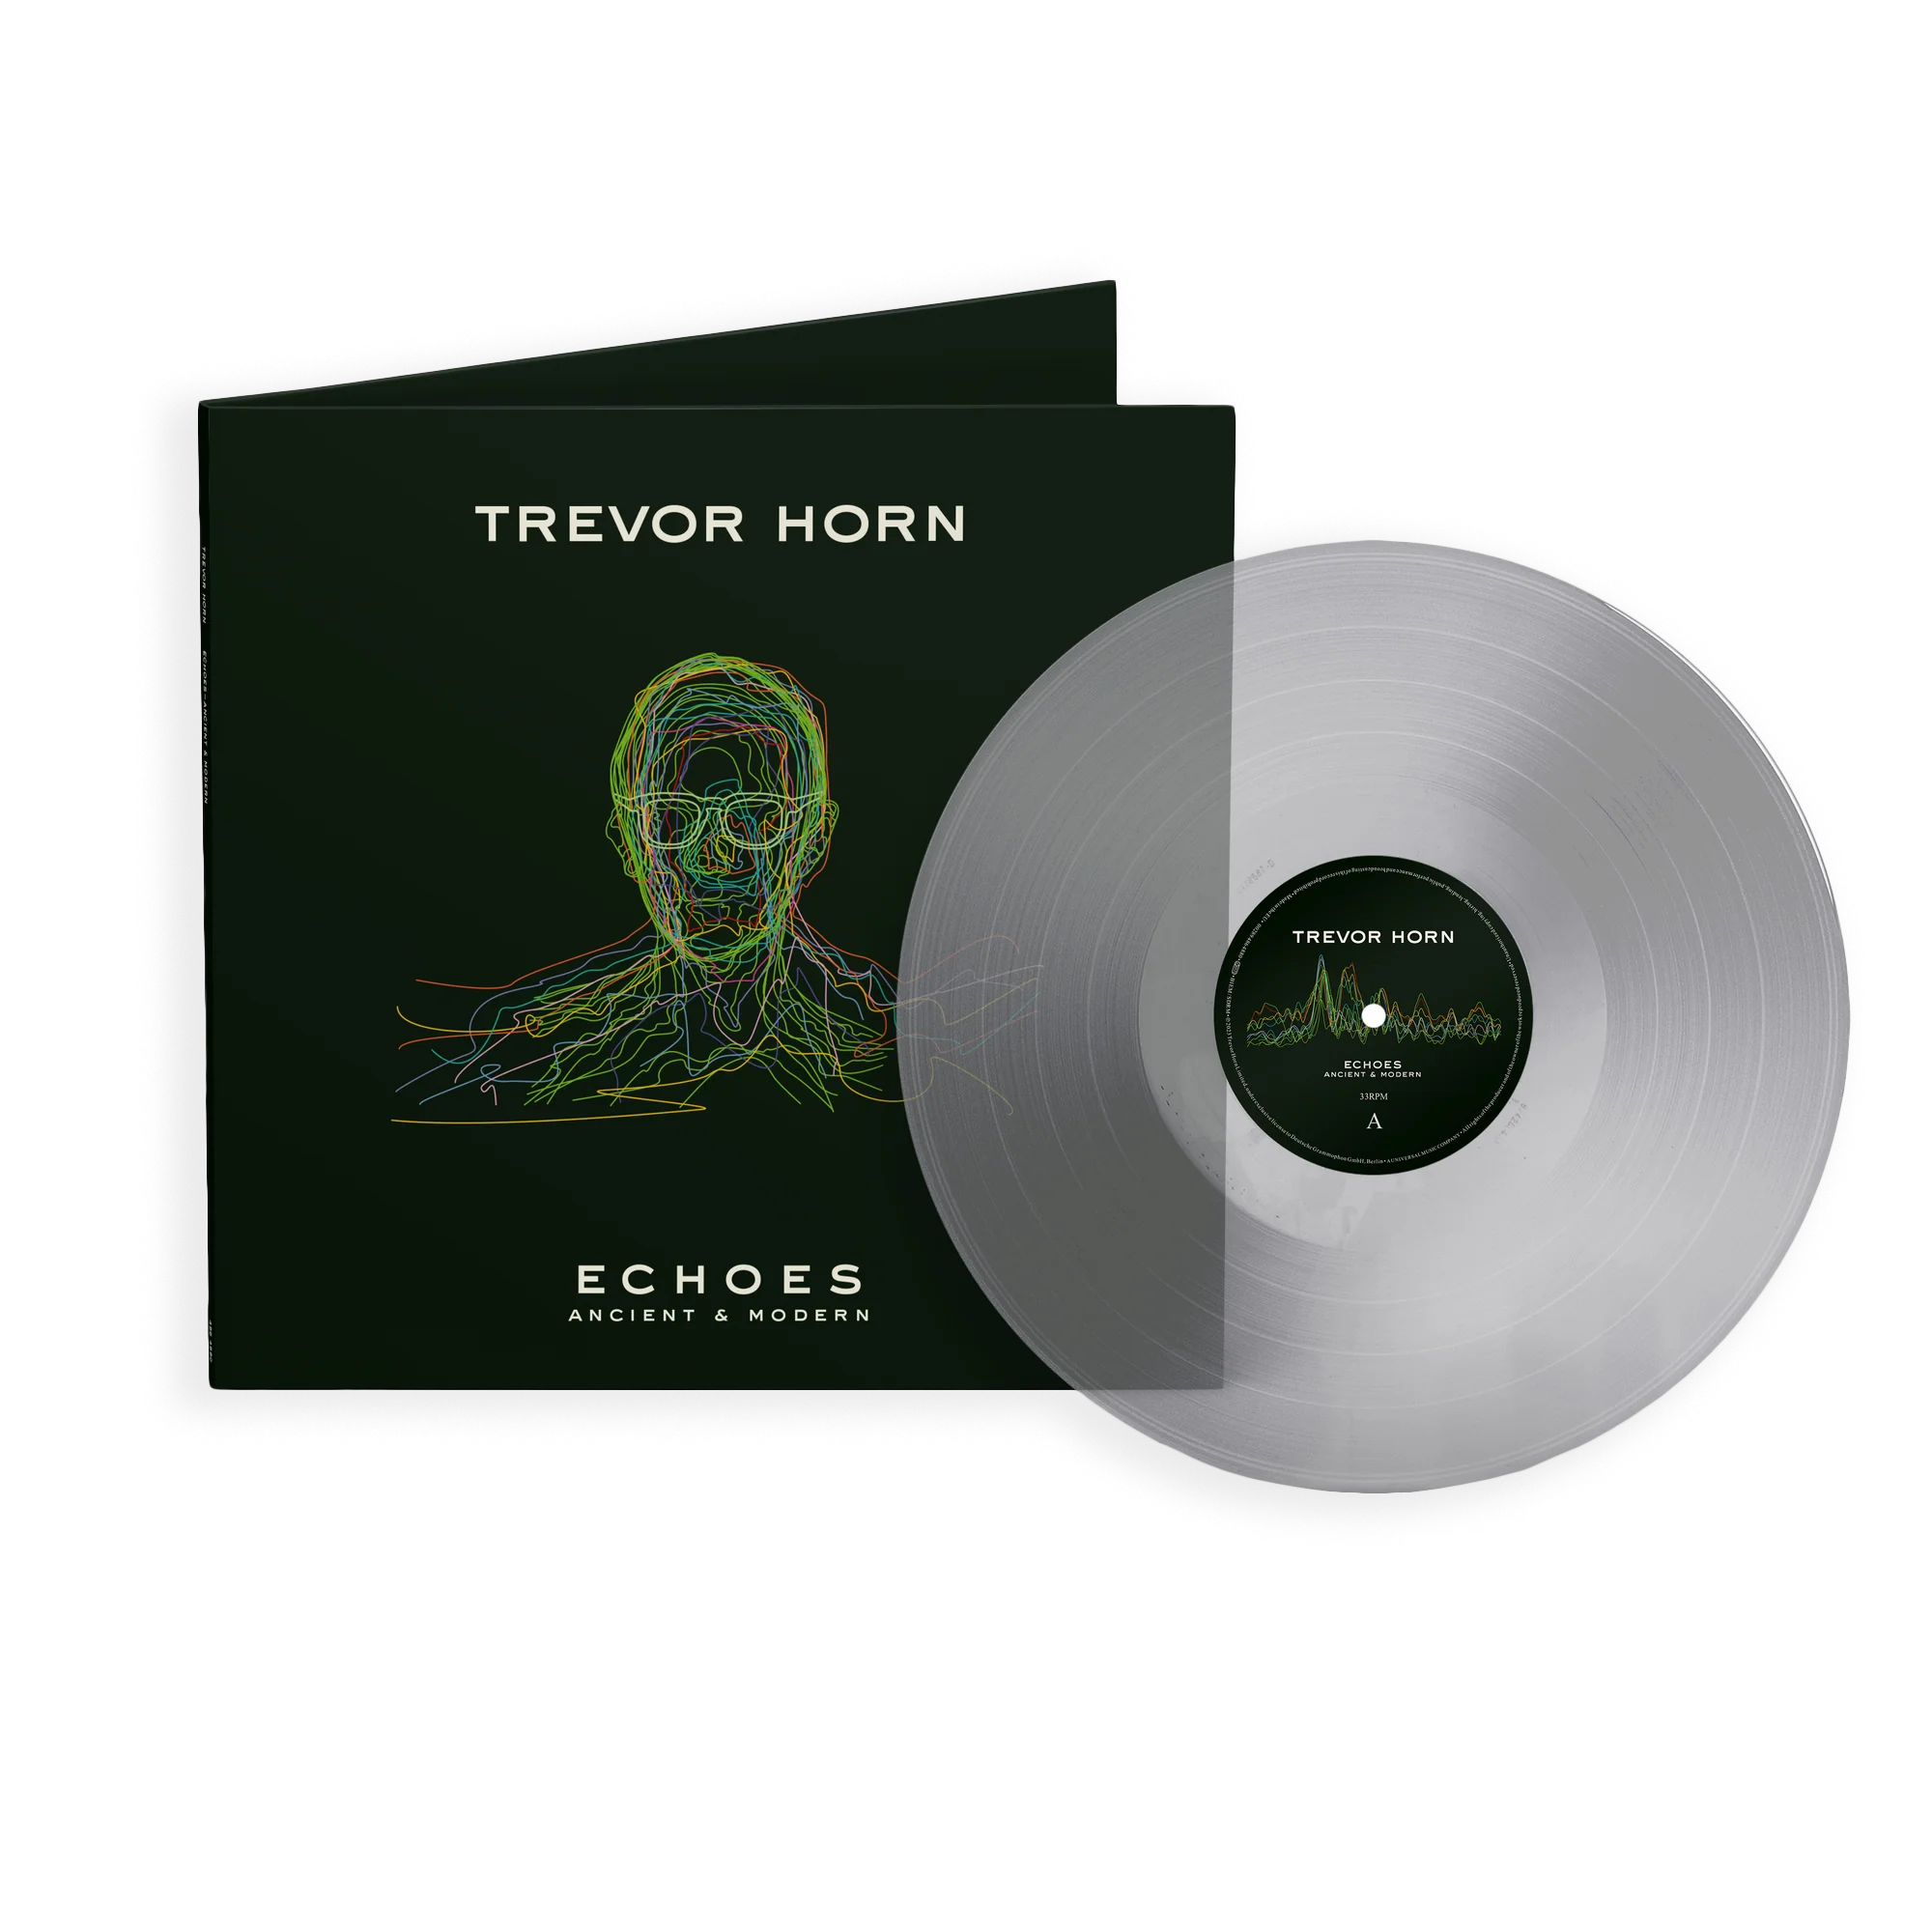 Echoes - Ancient & Modern: Exclusive Clear Vinyl LP + Signed Print (by Trevor Horn & Tori Amos)